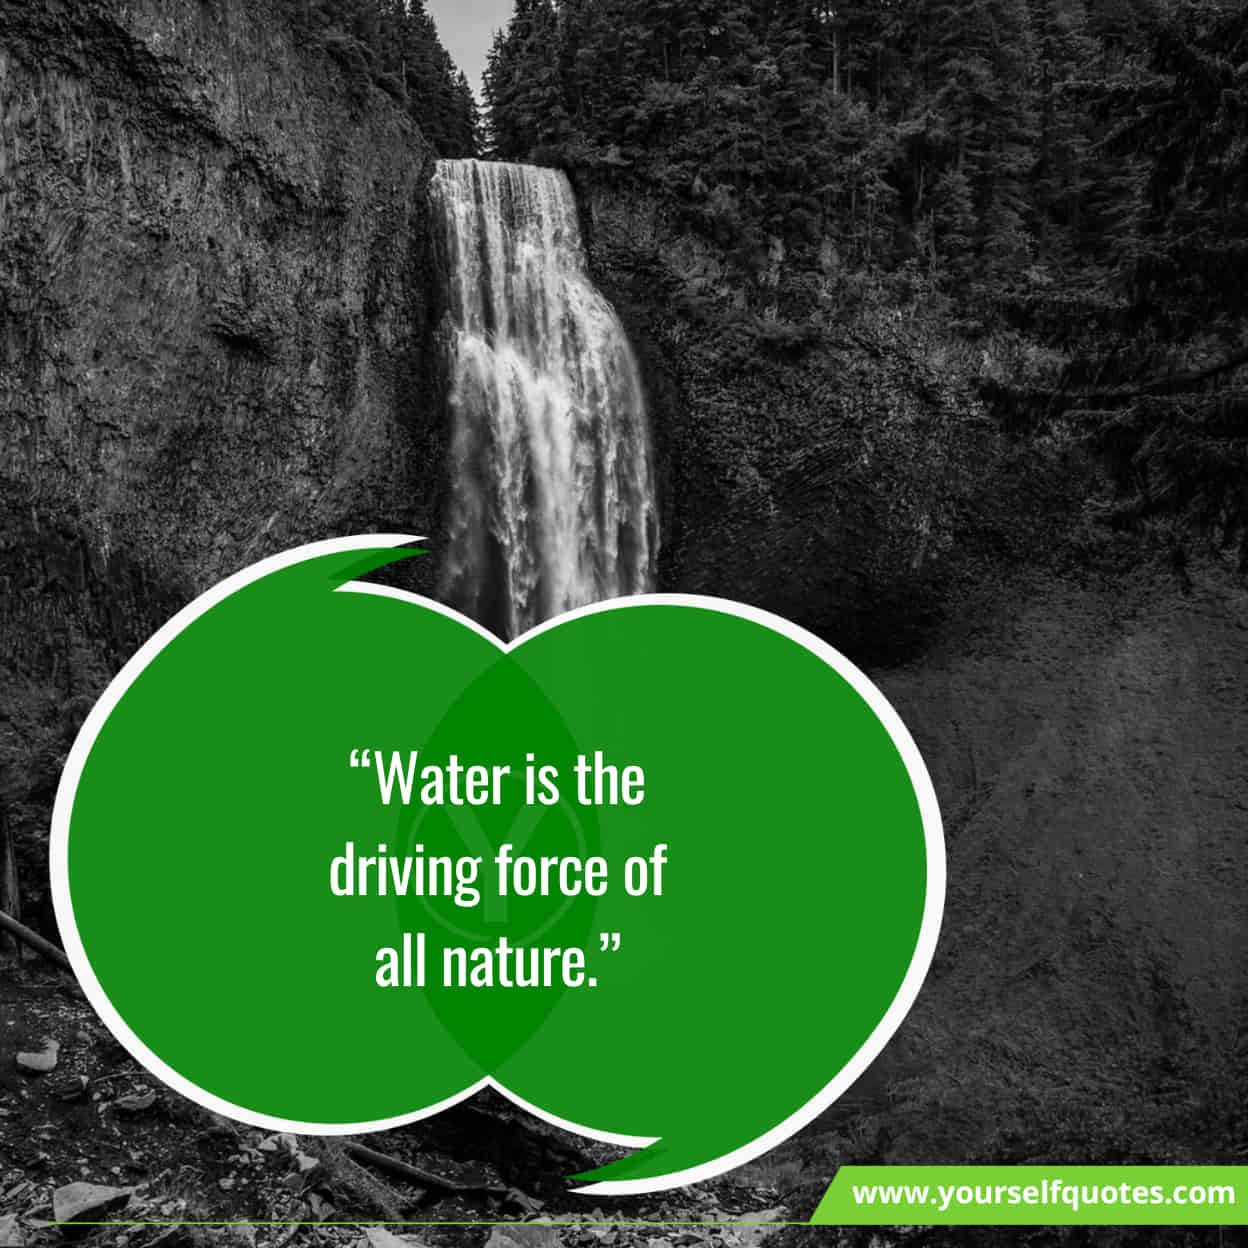 Inspiring Quotes About Water